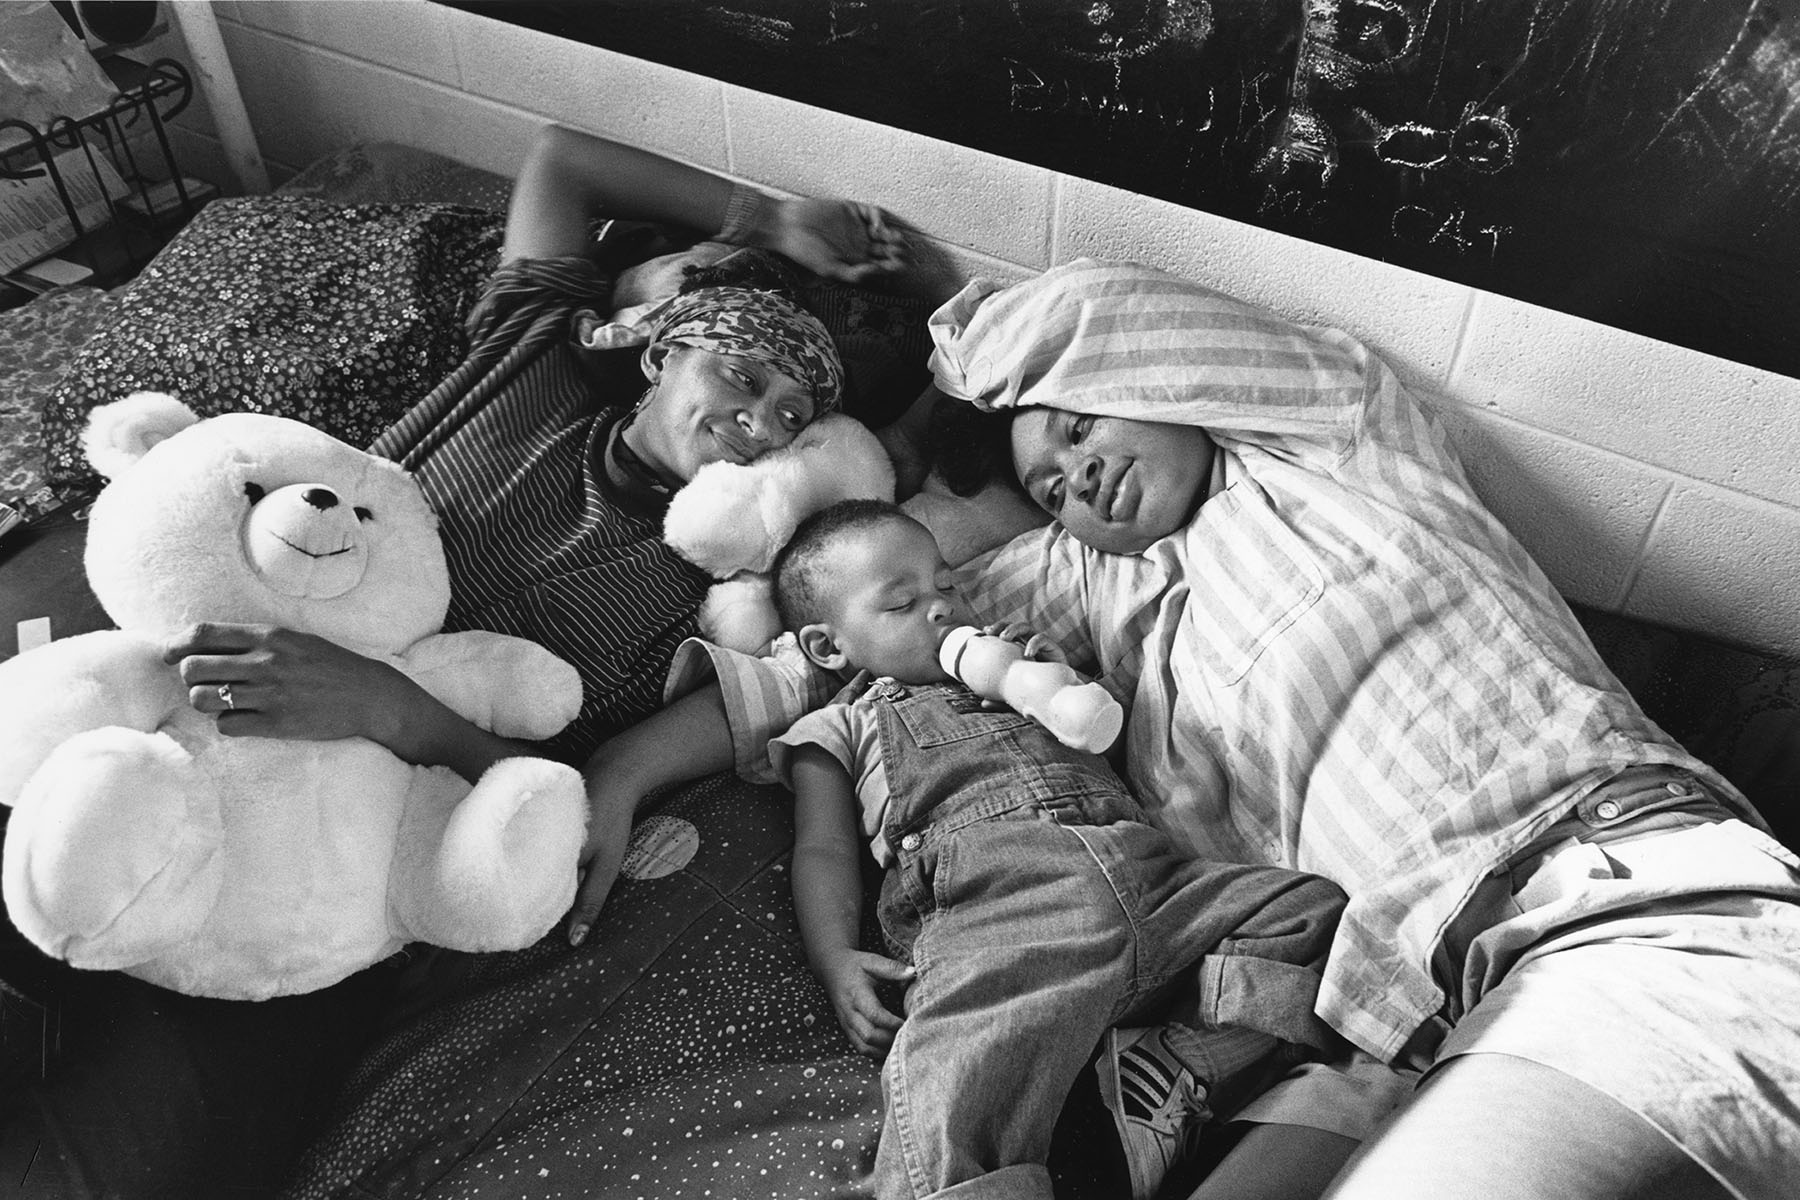 A grandmother, her daughter and her grandson lay on a bed together. The grandson is having his bottle and the grand mother is clutching a large teddy bear.